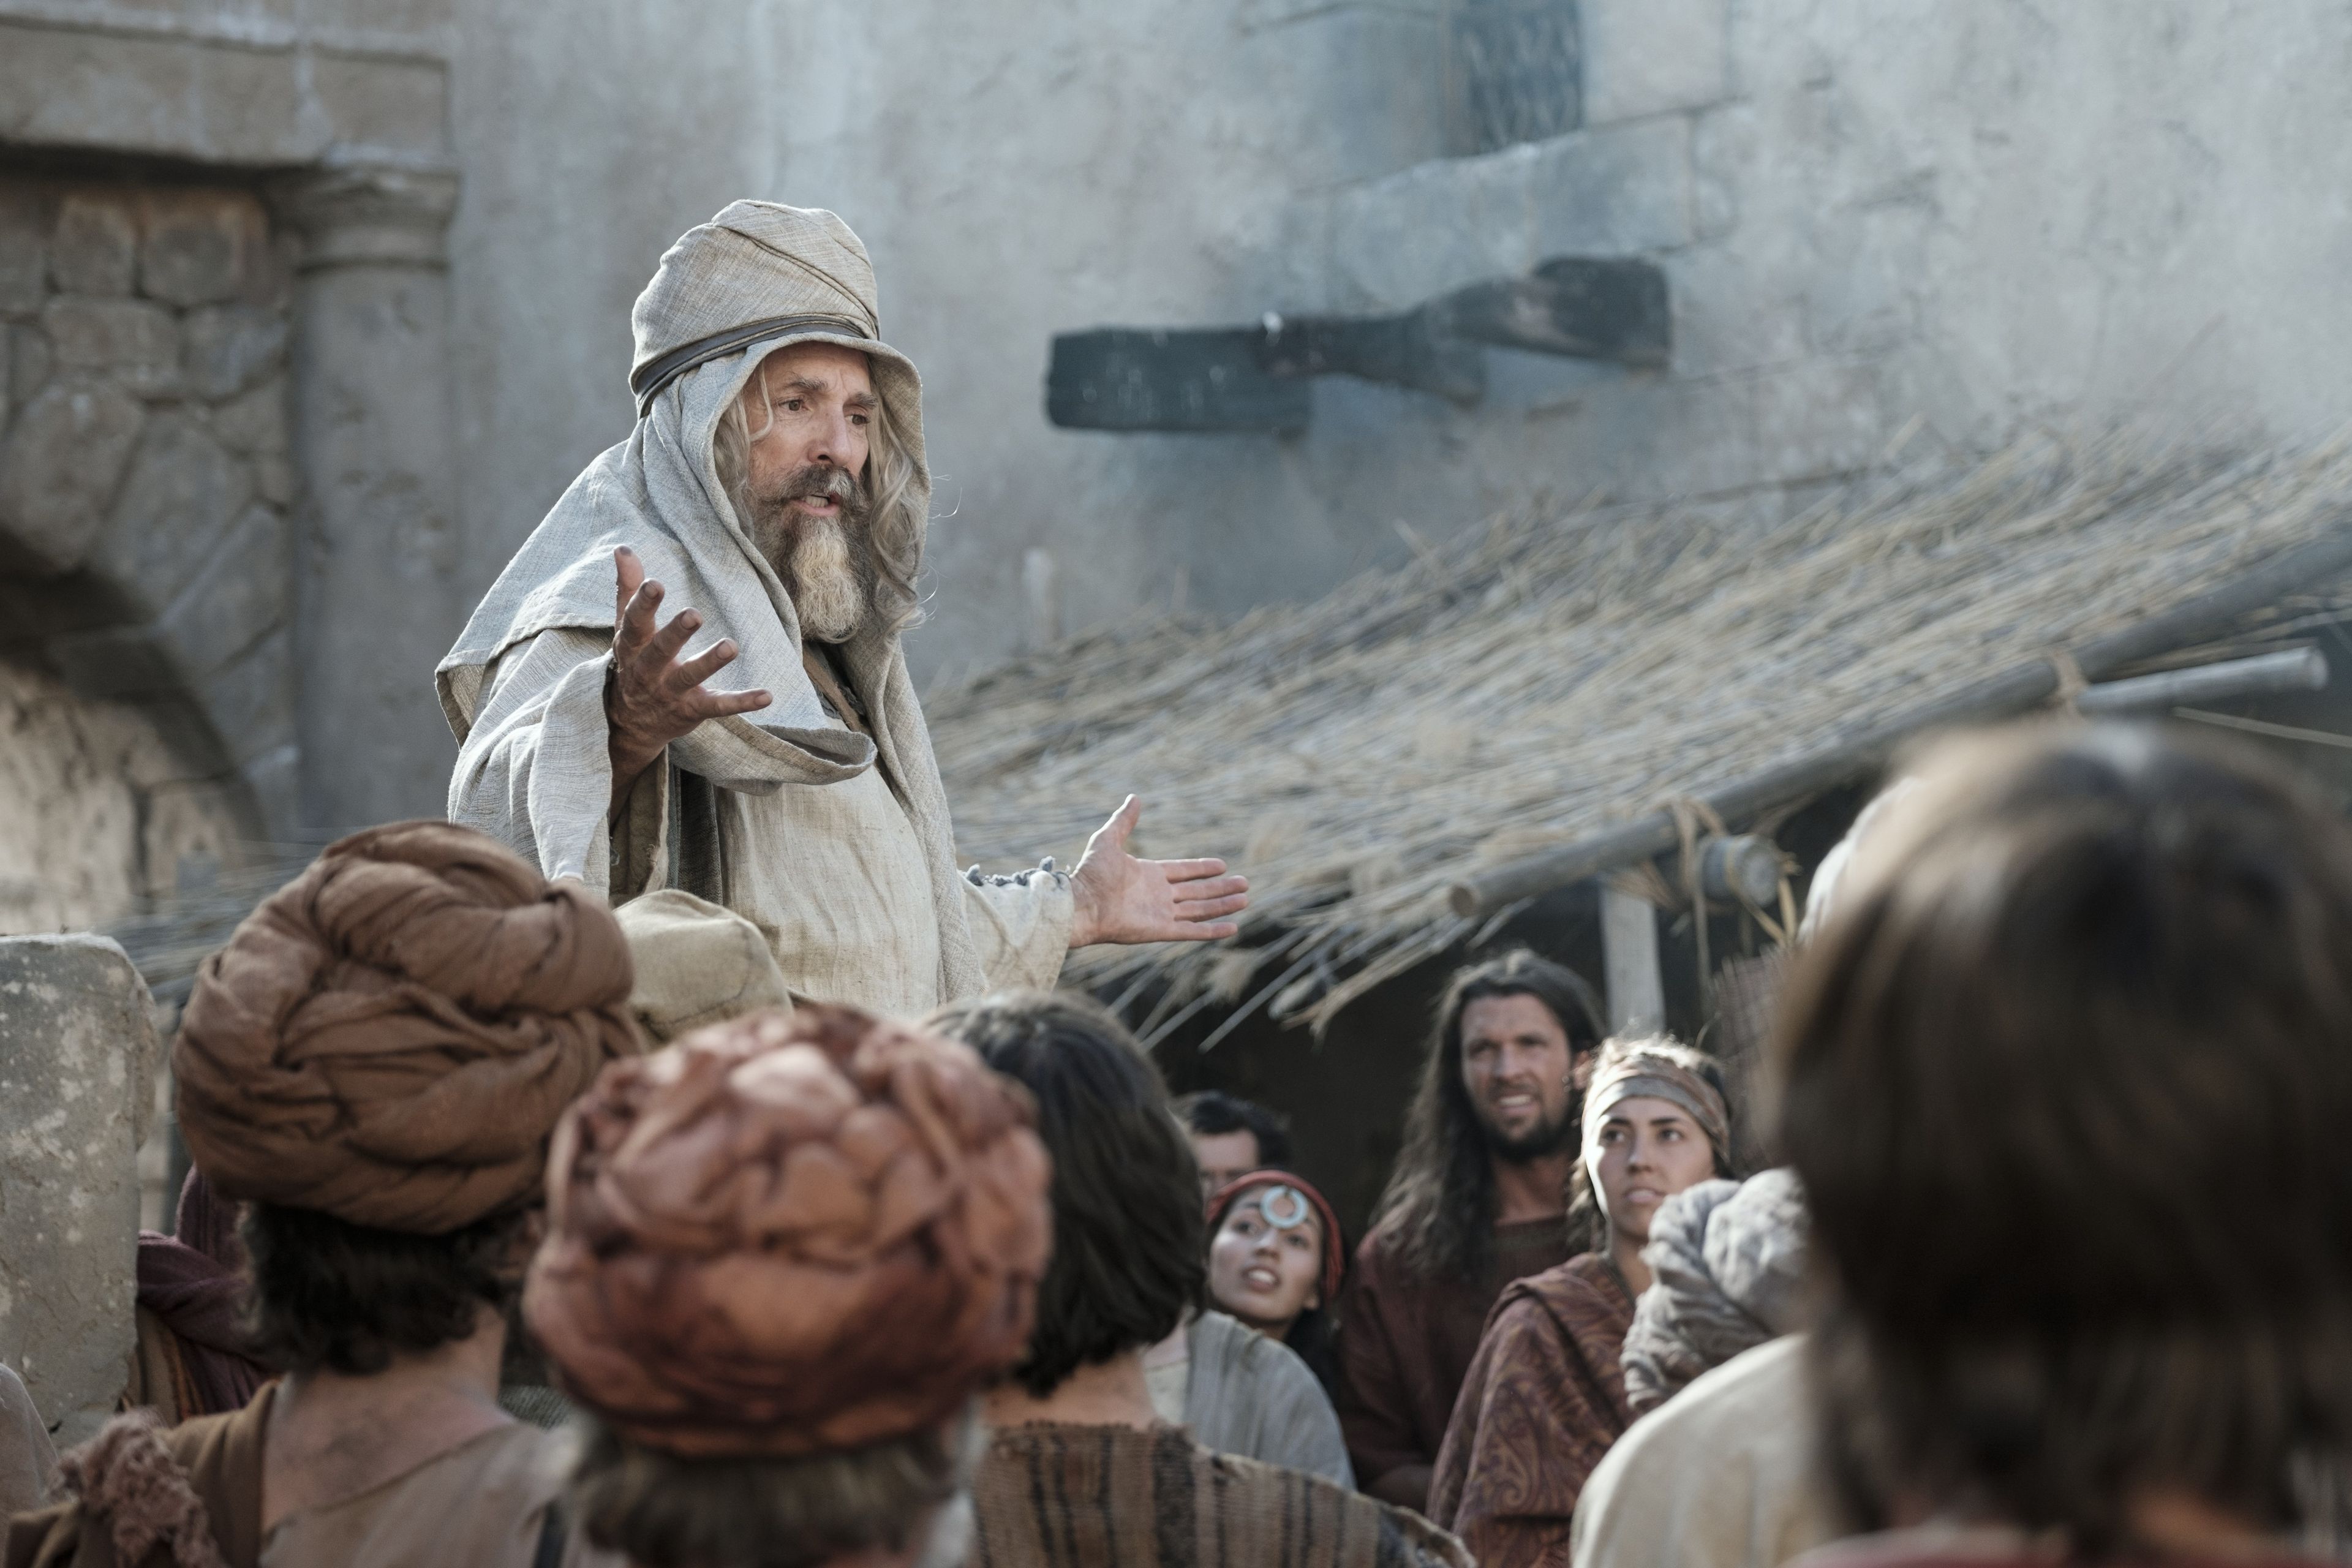 Lehi preaches to a crowd in Jerusalem.